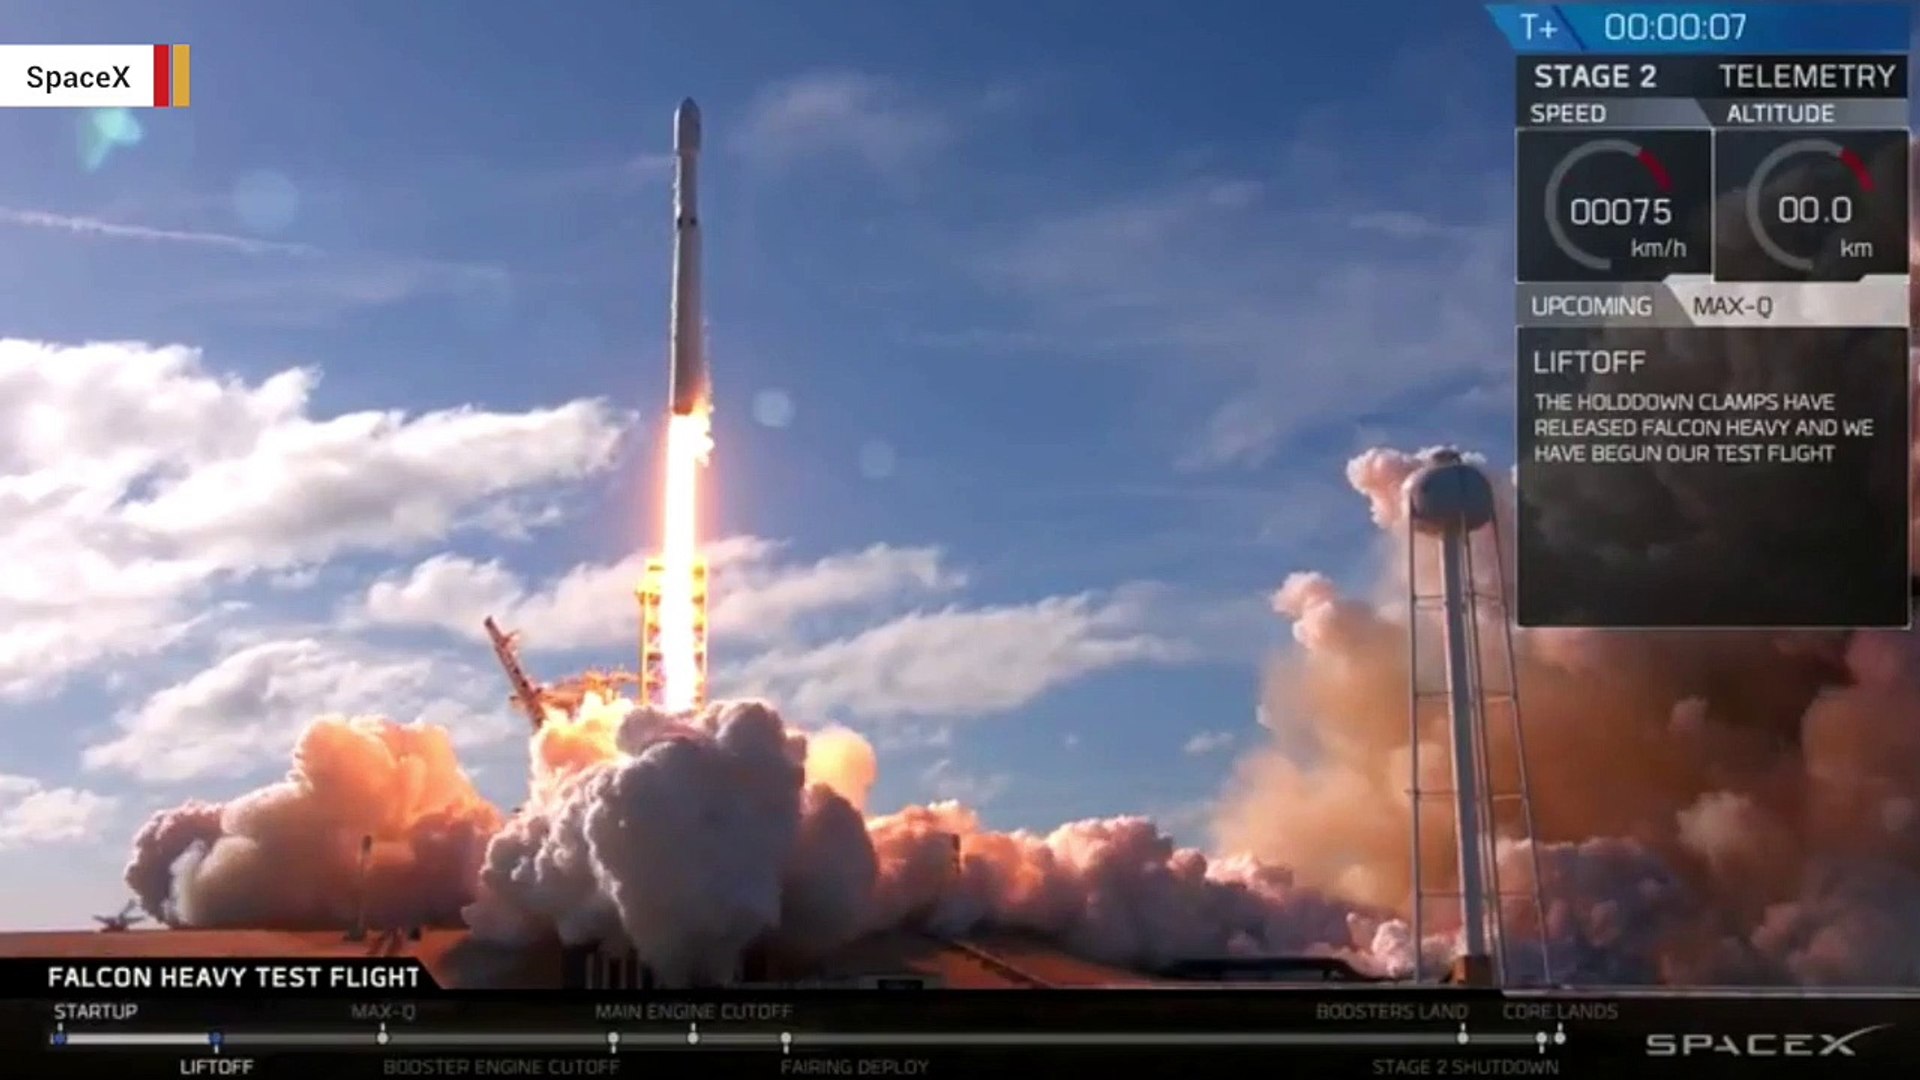 SpaceX Launches Falcon Heavy Test Flight